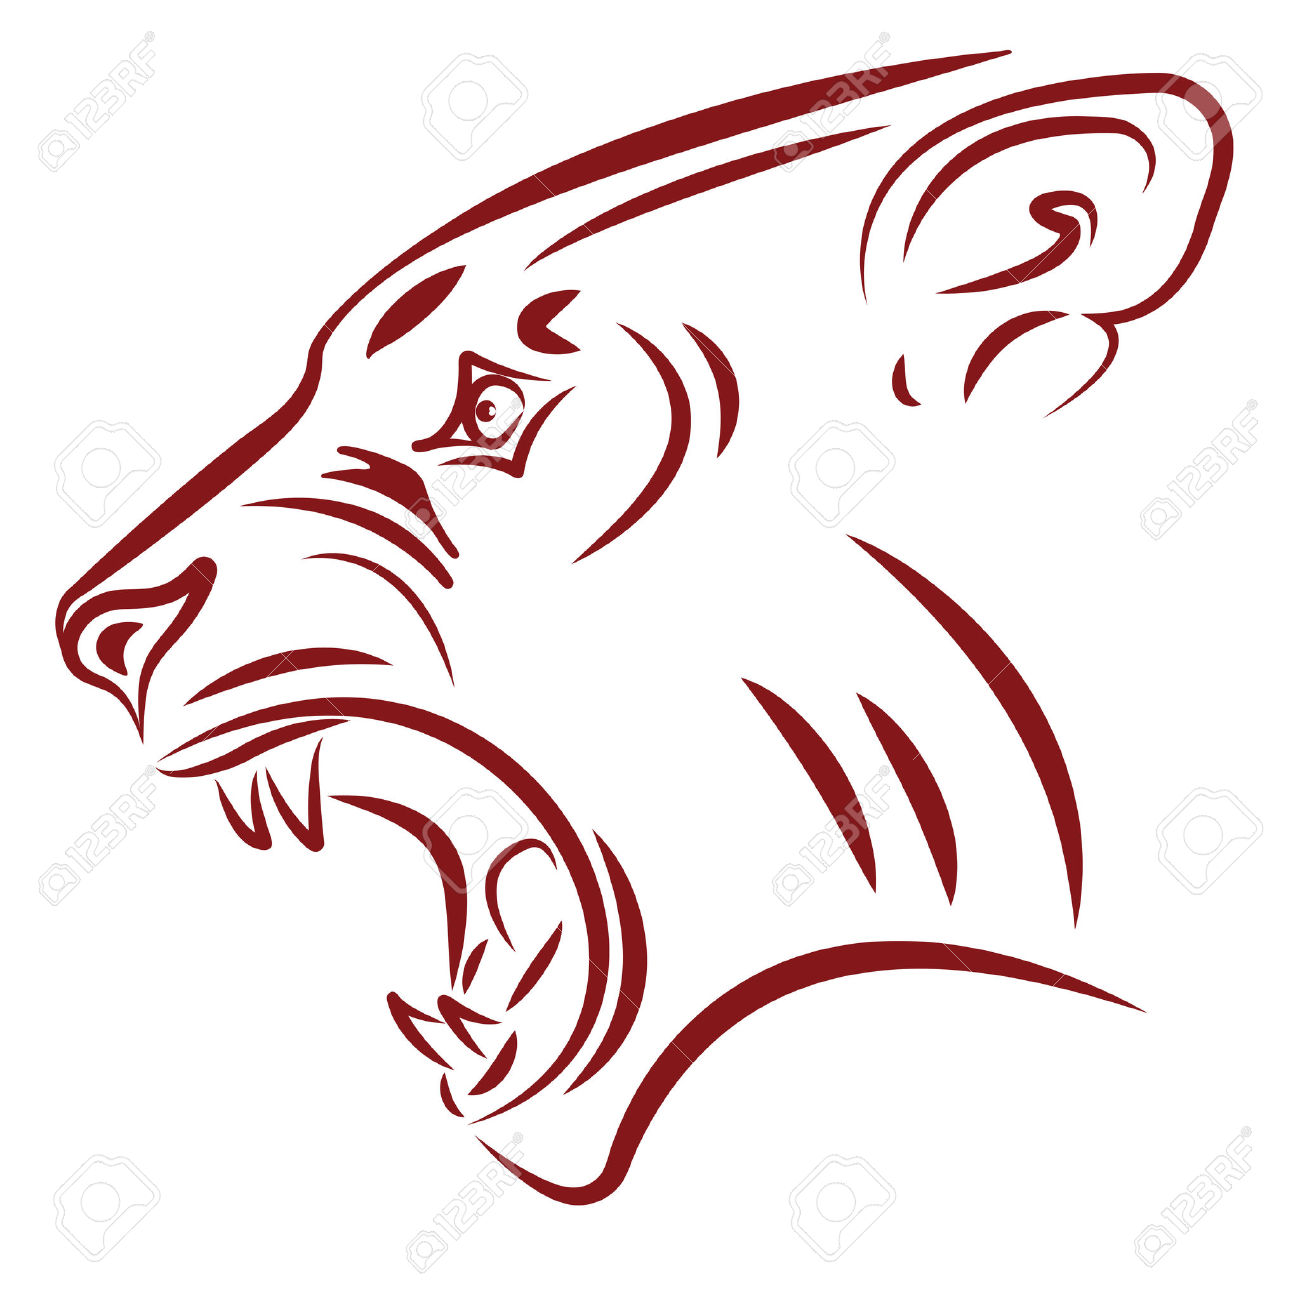 Jaguar Clipart Free | Free download on ClipArtMag